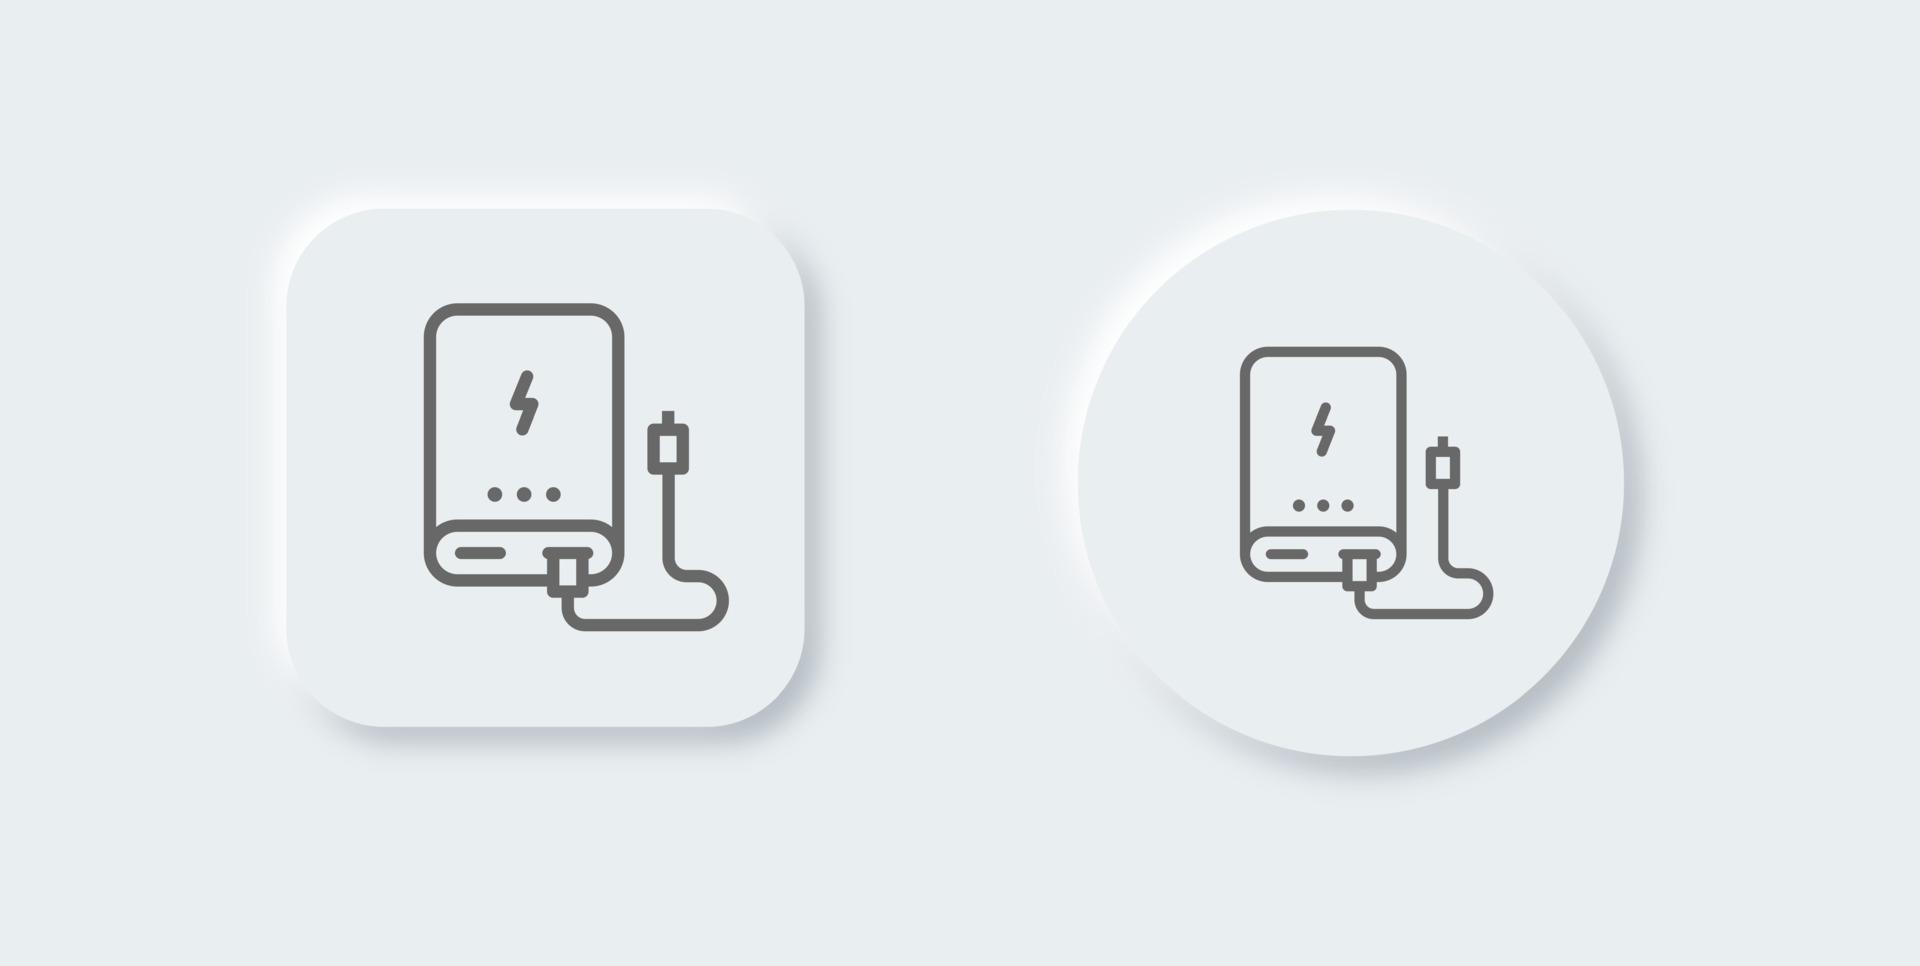 Powerbank line icon in neomorphic design style. Power supply signs vector illustration.